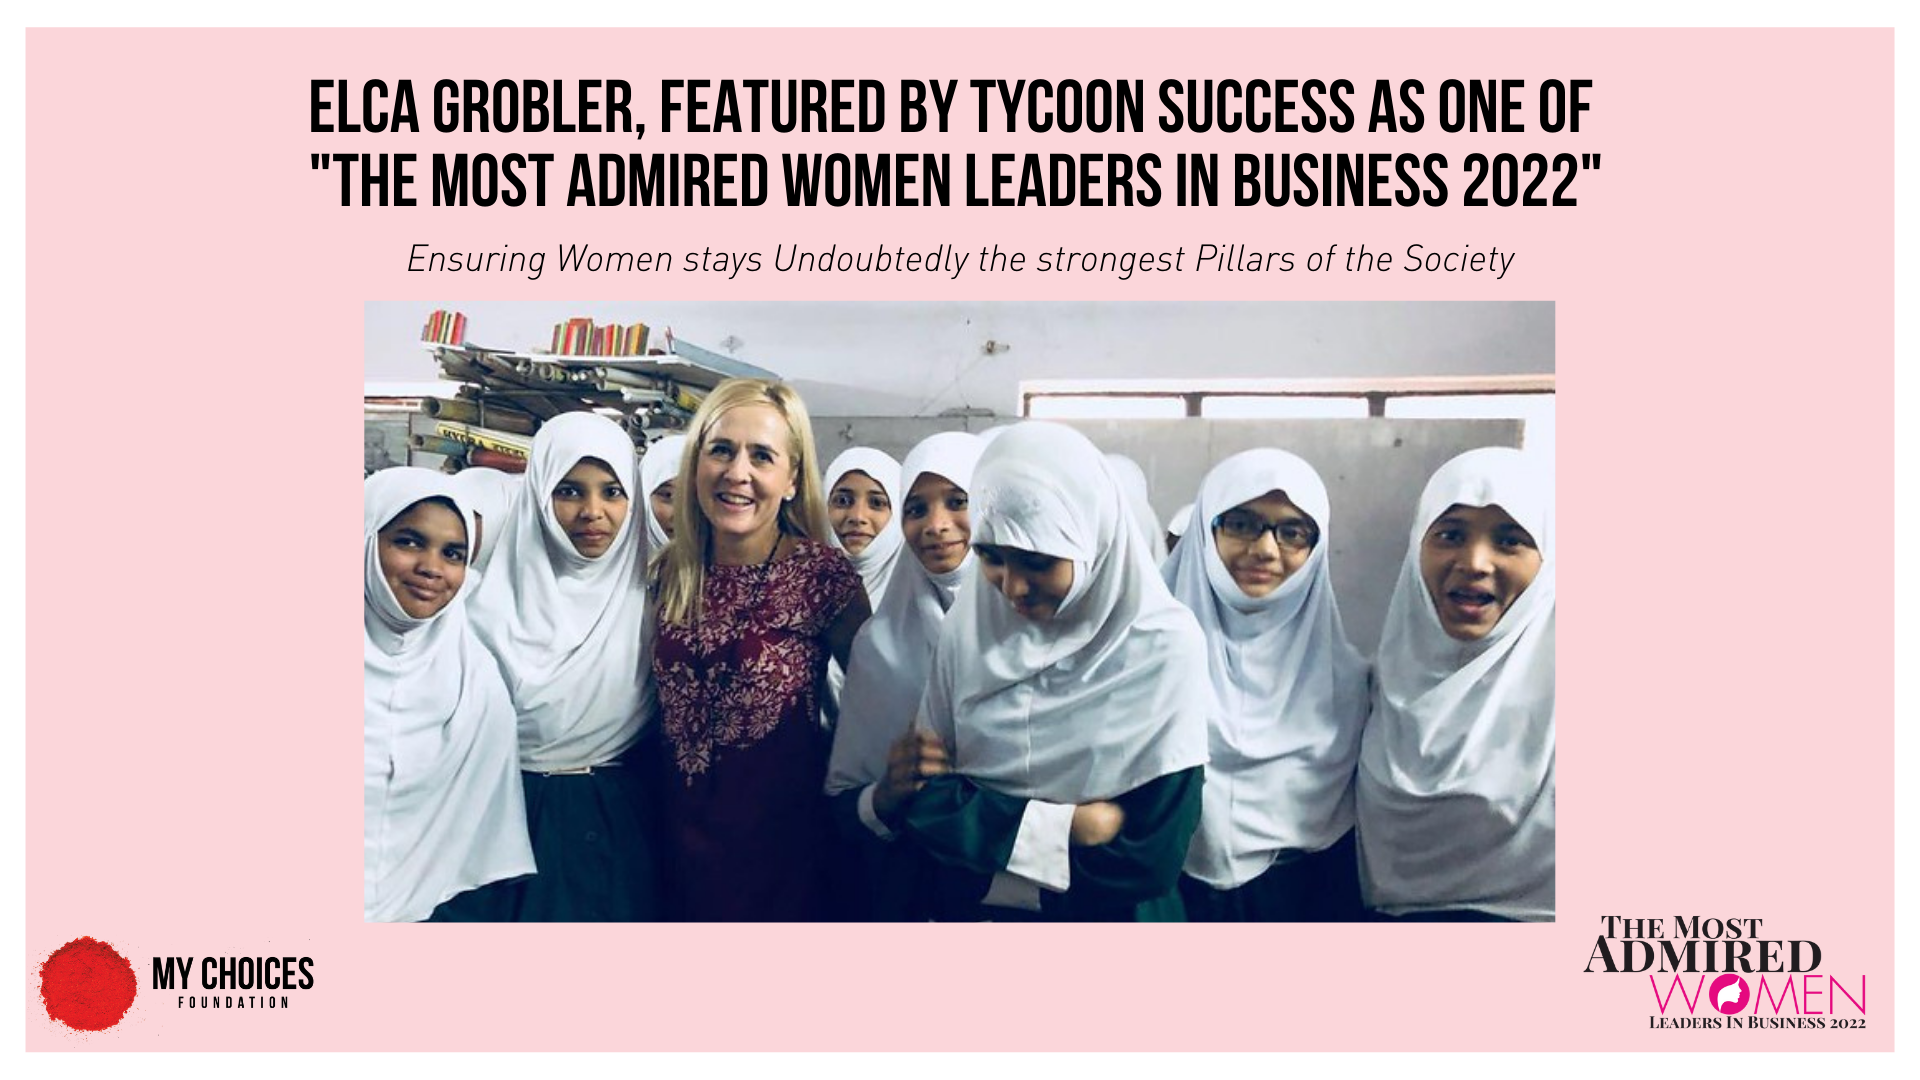 Elca Grobler, featured by Tycoon Success as “The most admired women leaders in Business 2022”